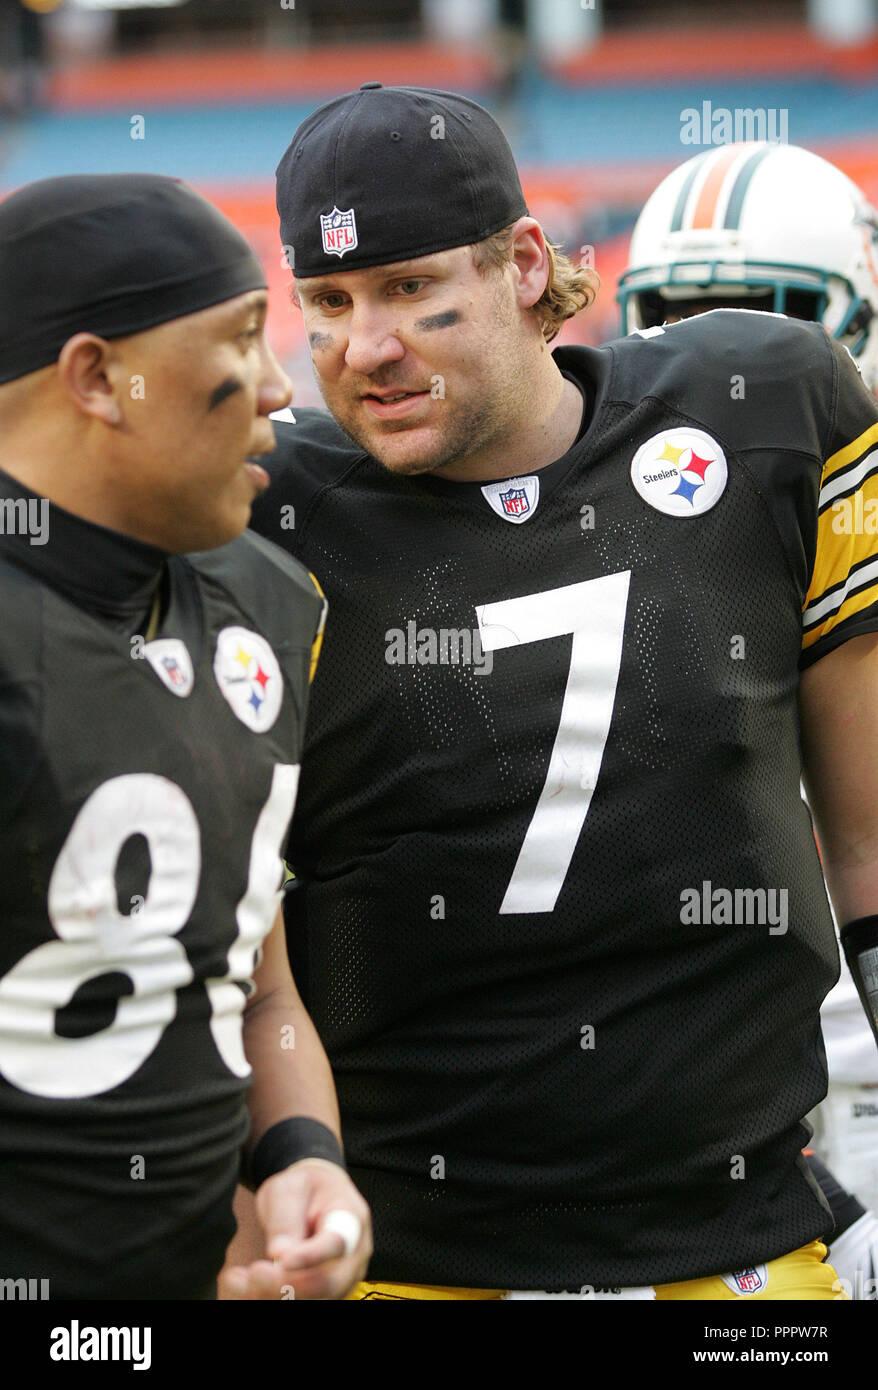 Pittsburgh Steelers quarterback Ben Roethlisberger (7) walks off the field with teammate Hines Ward after defeating the Miami Dophins 30-24 at Landshark stadium in Miami on January 3, 2010. Stock Photo